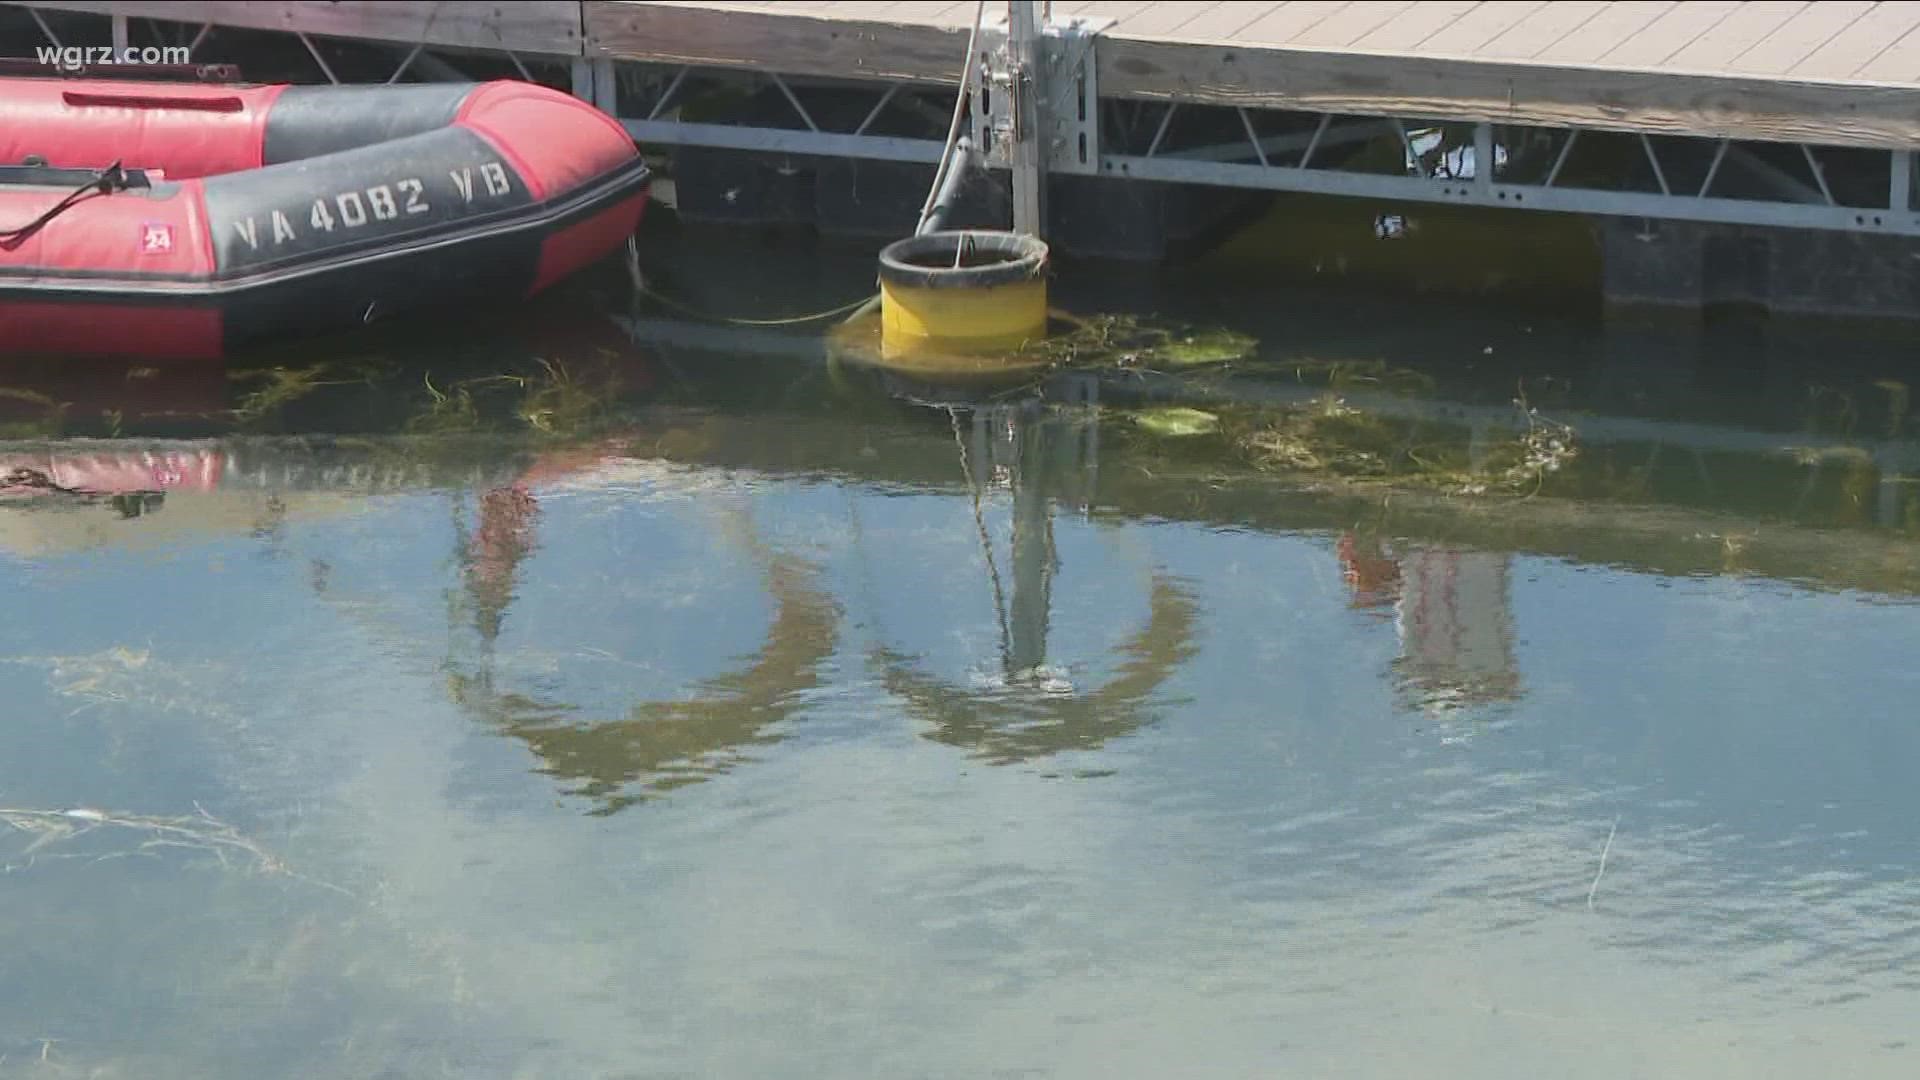 A technology that's been used in other parts of the world to remove trash from waterways is now being deployed along Buffalo's waterfront.